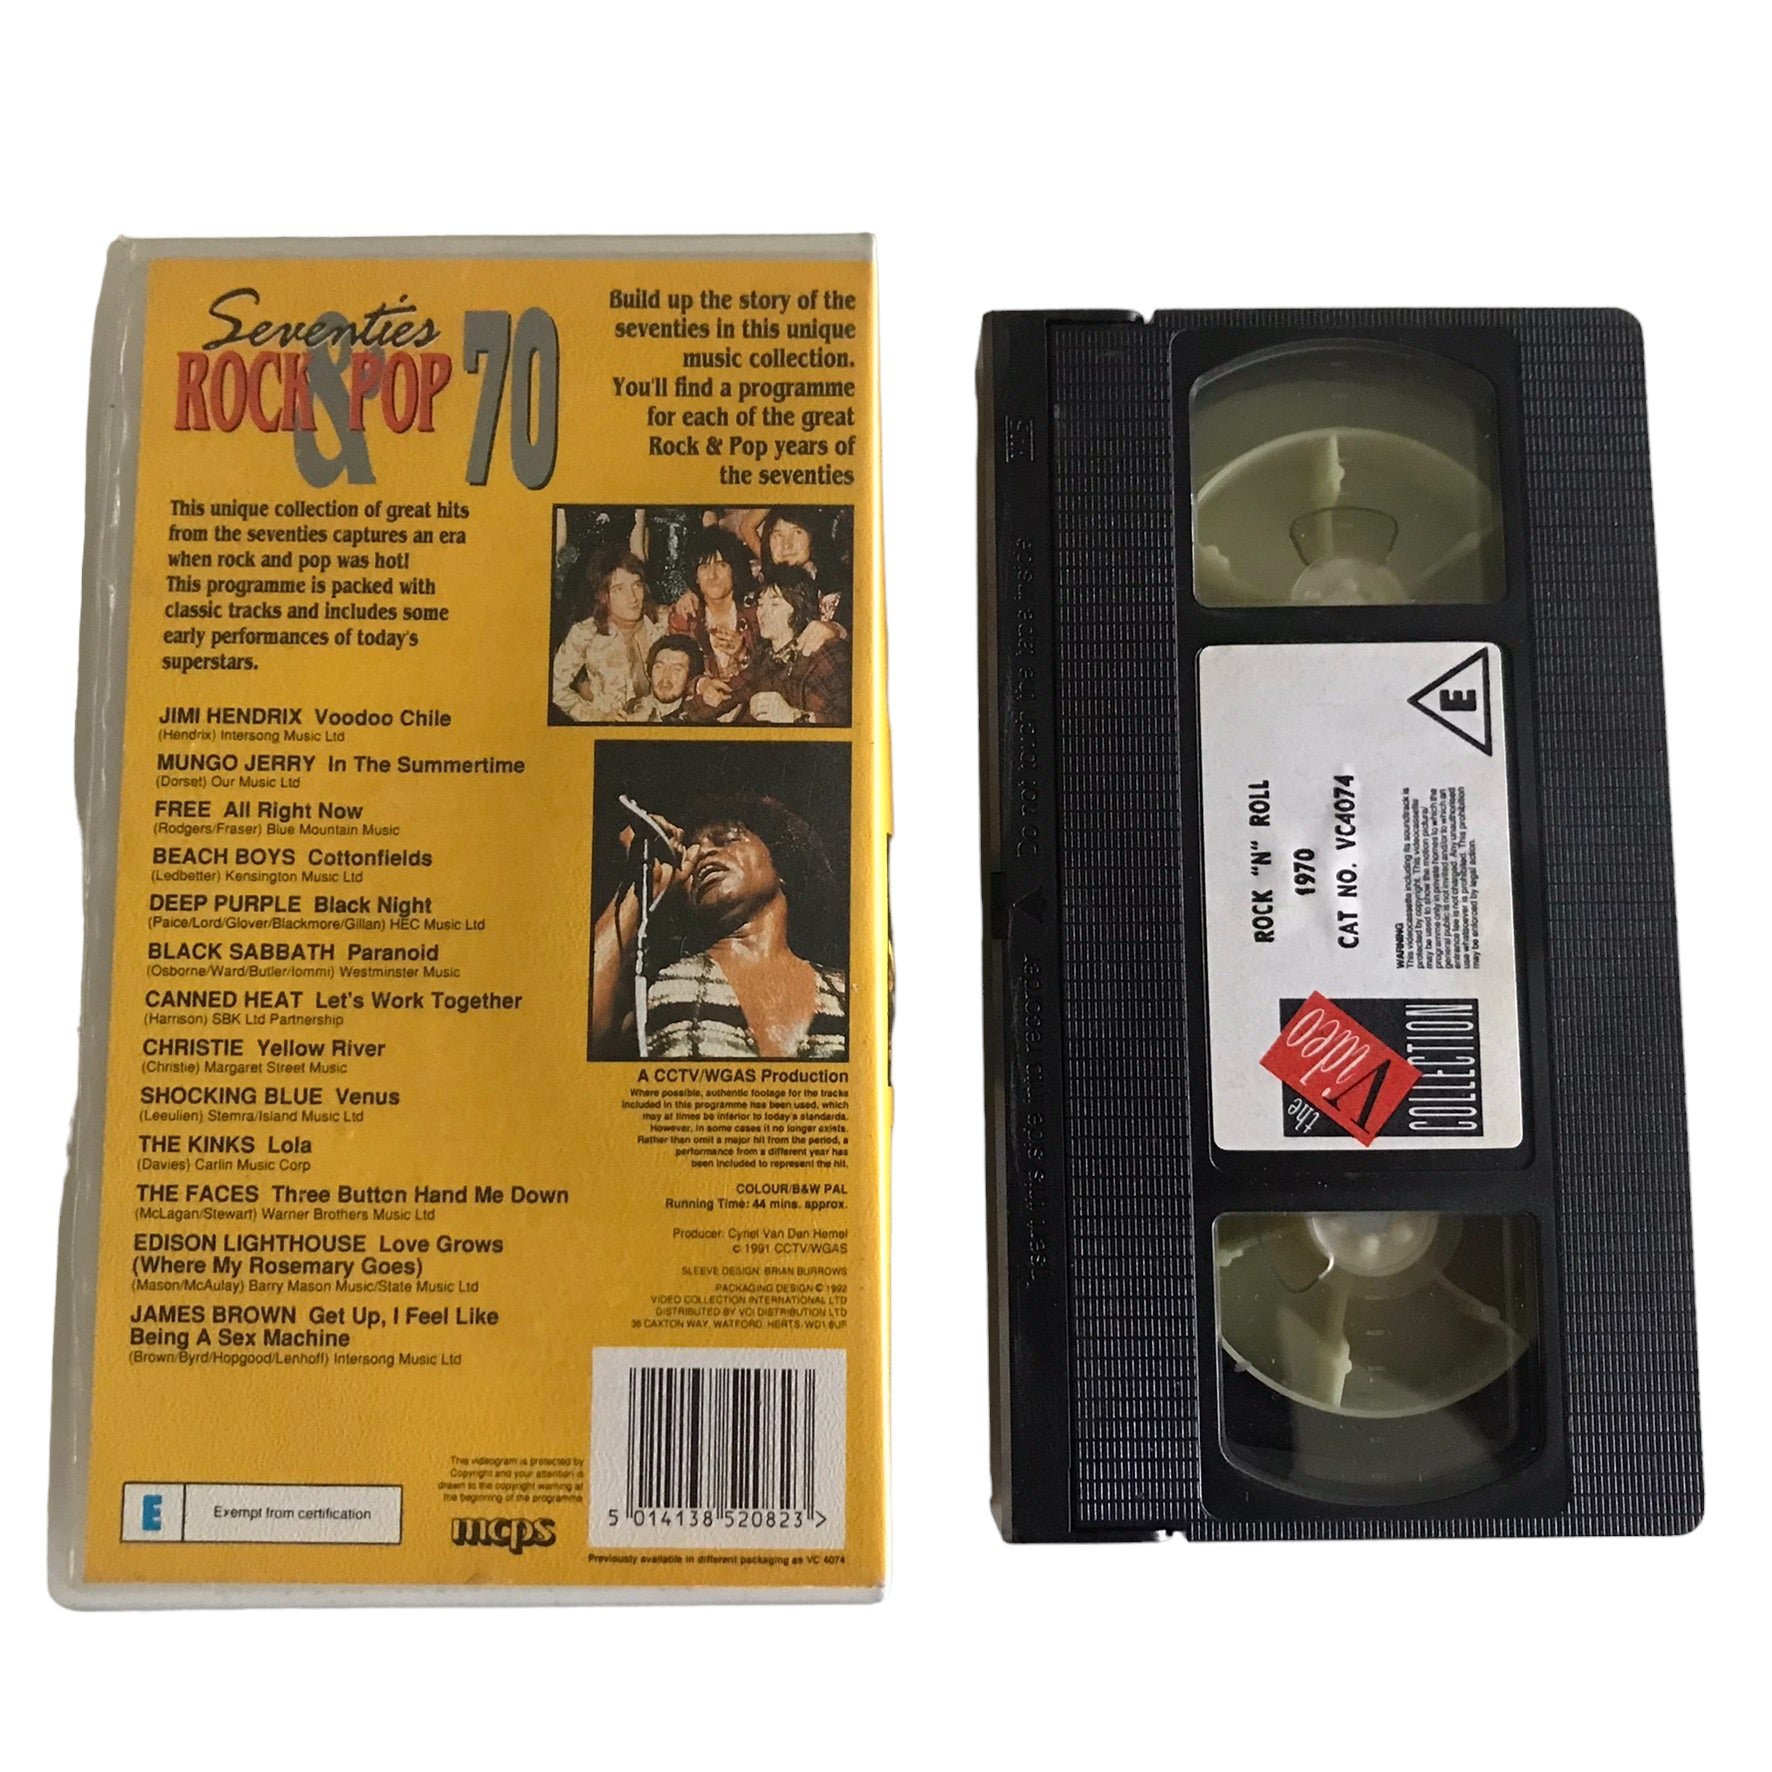 Rock & Roll - The Video Collection - Music - Pal - VHS